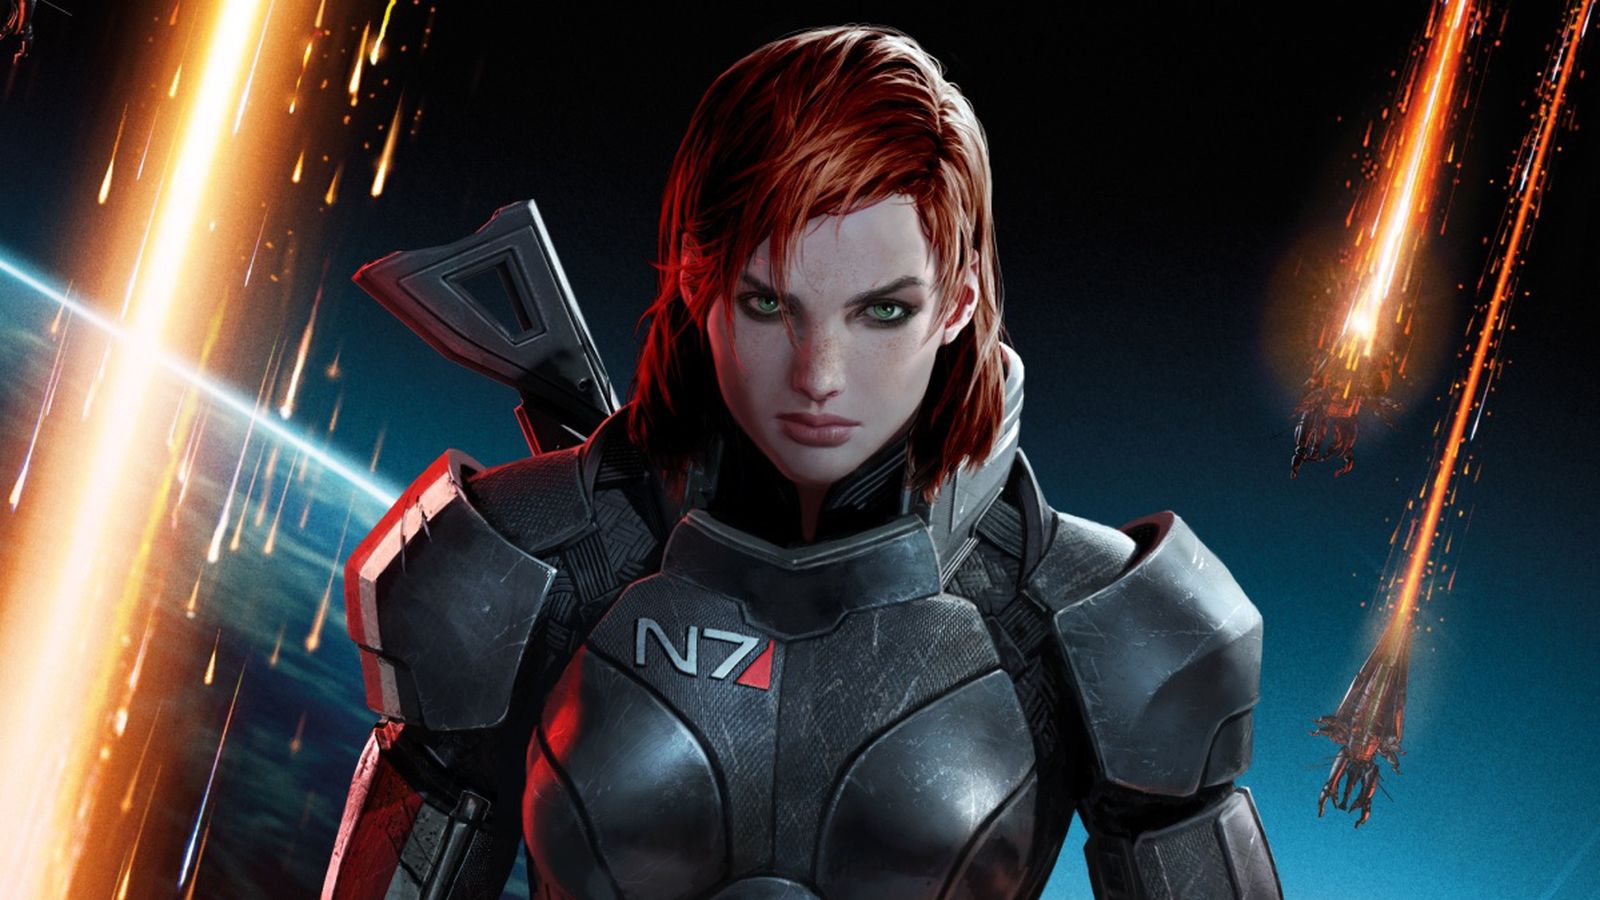  A new Mass Effect game is in development, confirms BioWare 